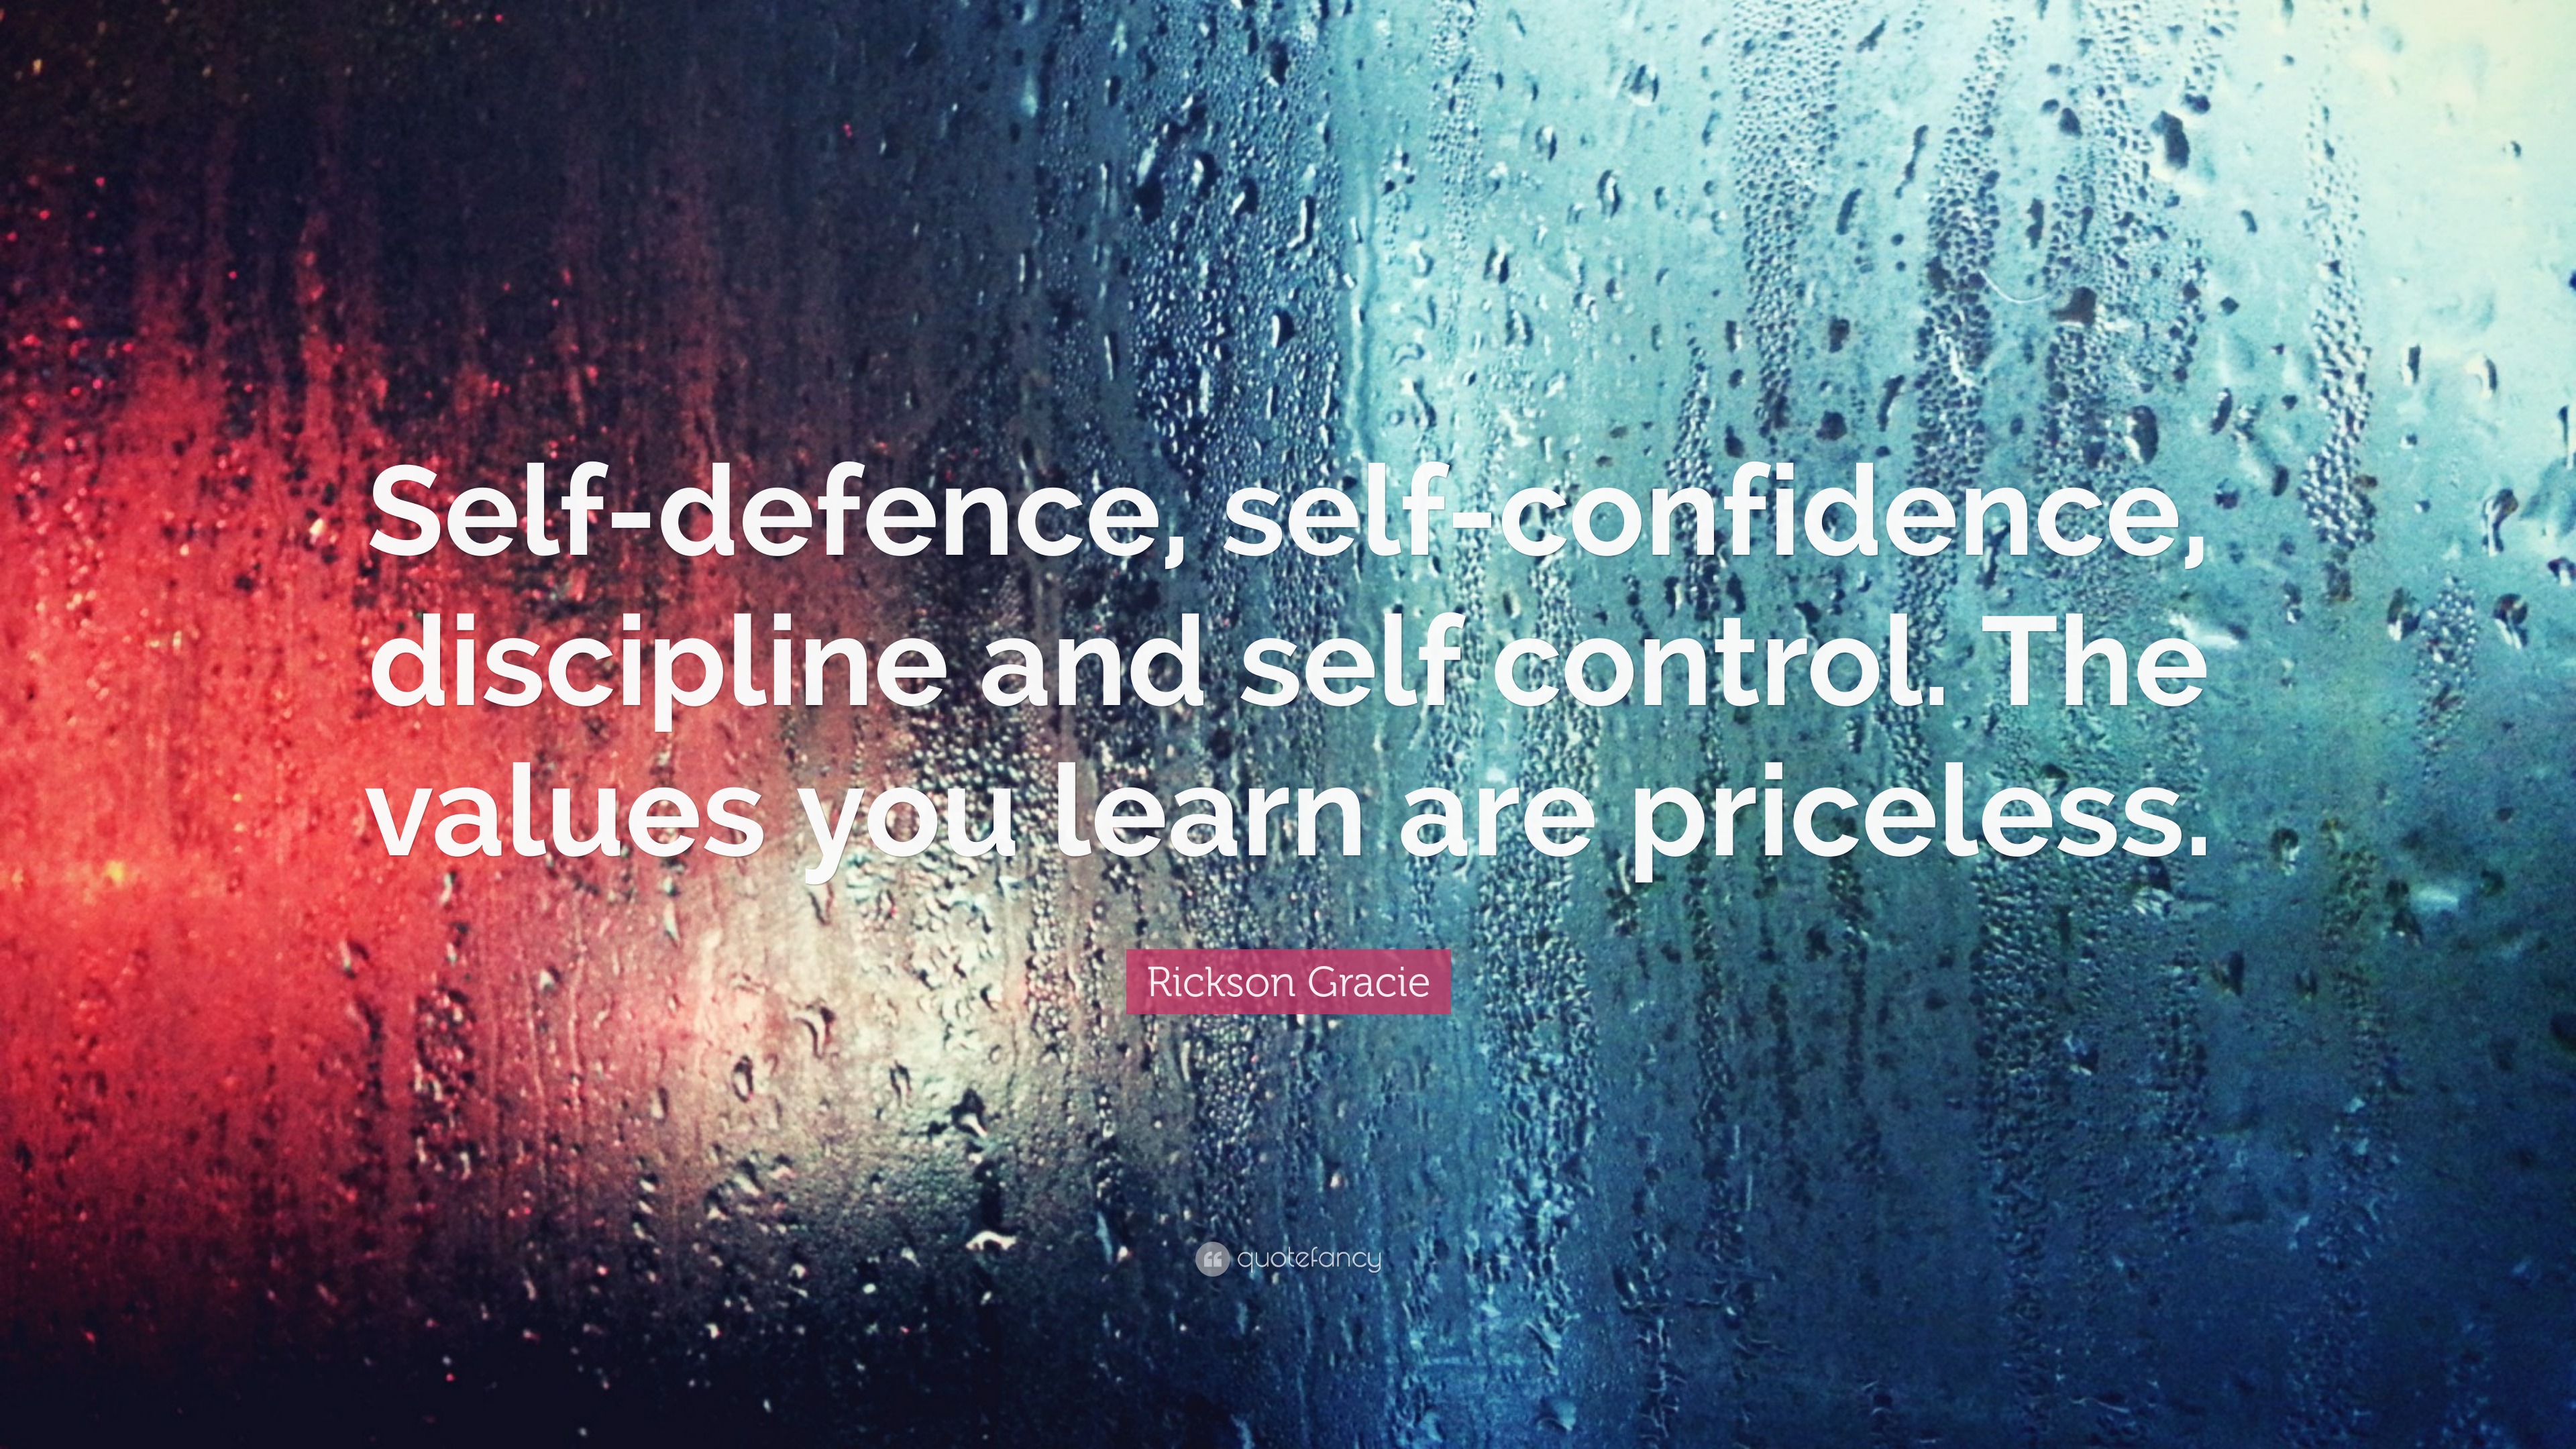 Rickson Gracie Quote: “Self-defence, self-confidence, discipline and self  control. The values you learn are